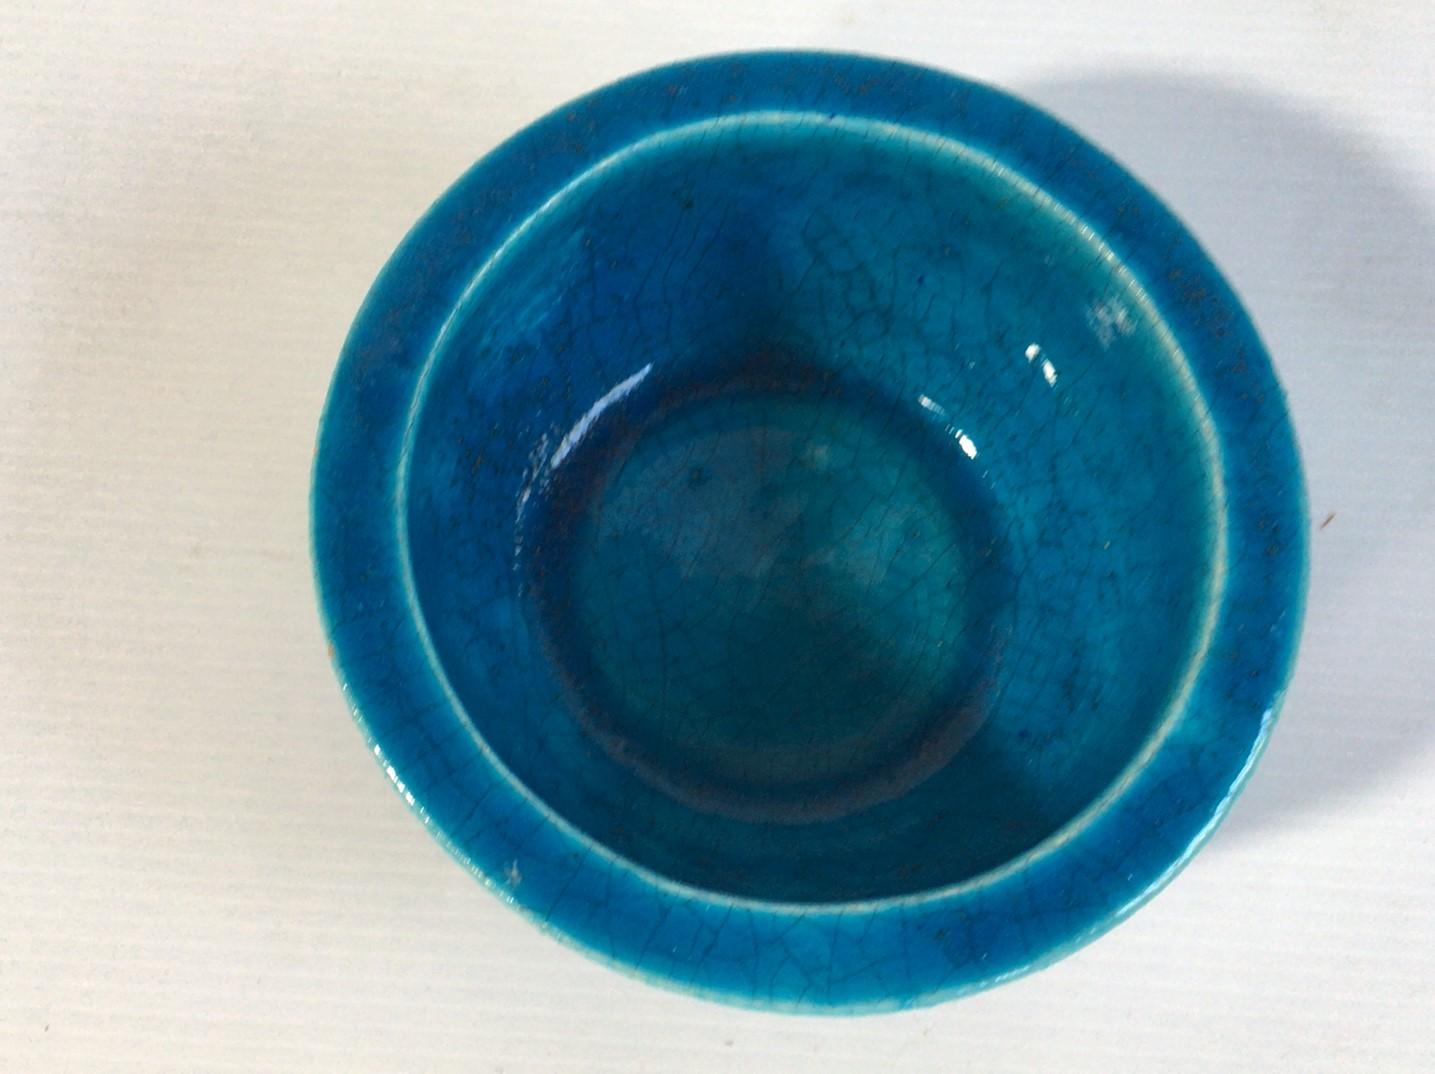 French Art Deco turquoise bowl signed Lachenal.
Measures: Height 2.3 inches.
Diameter 5.3 inches.
     